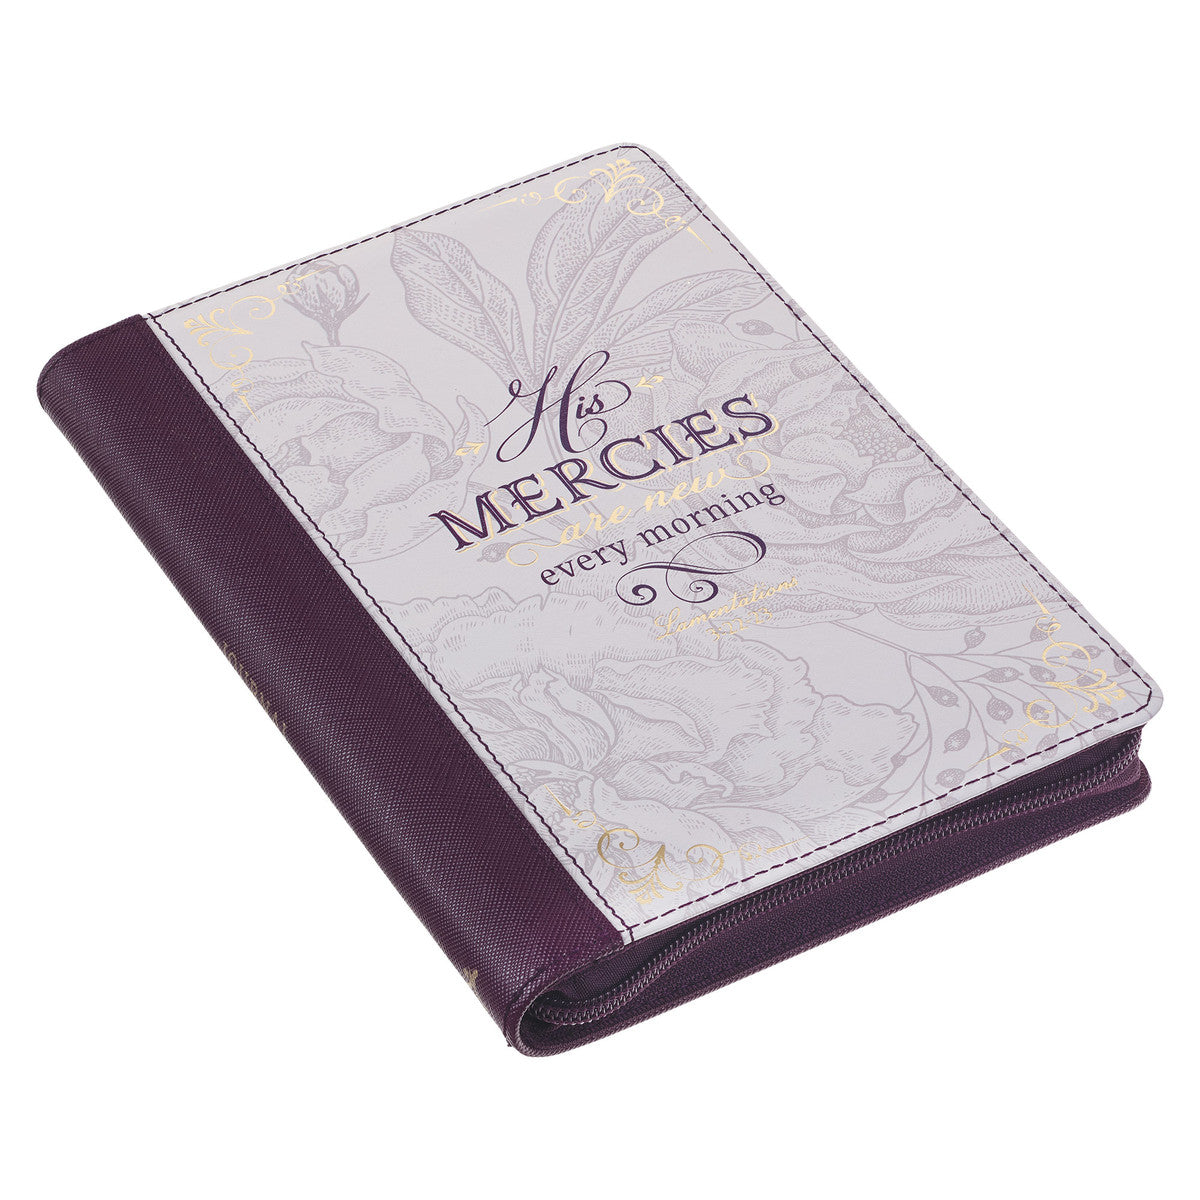 His Mercies are New Amethyst Purple Faux Leather Journal with Zipper Closure - Lamentations 3:22-23 - The Christian Gift Company